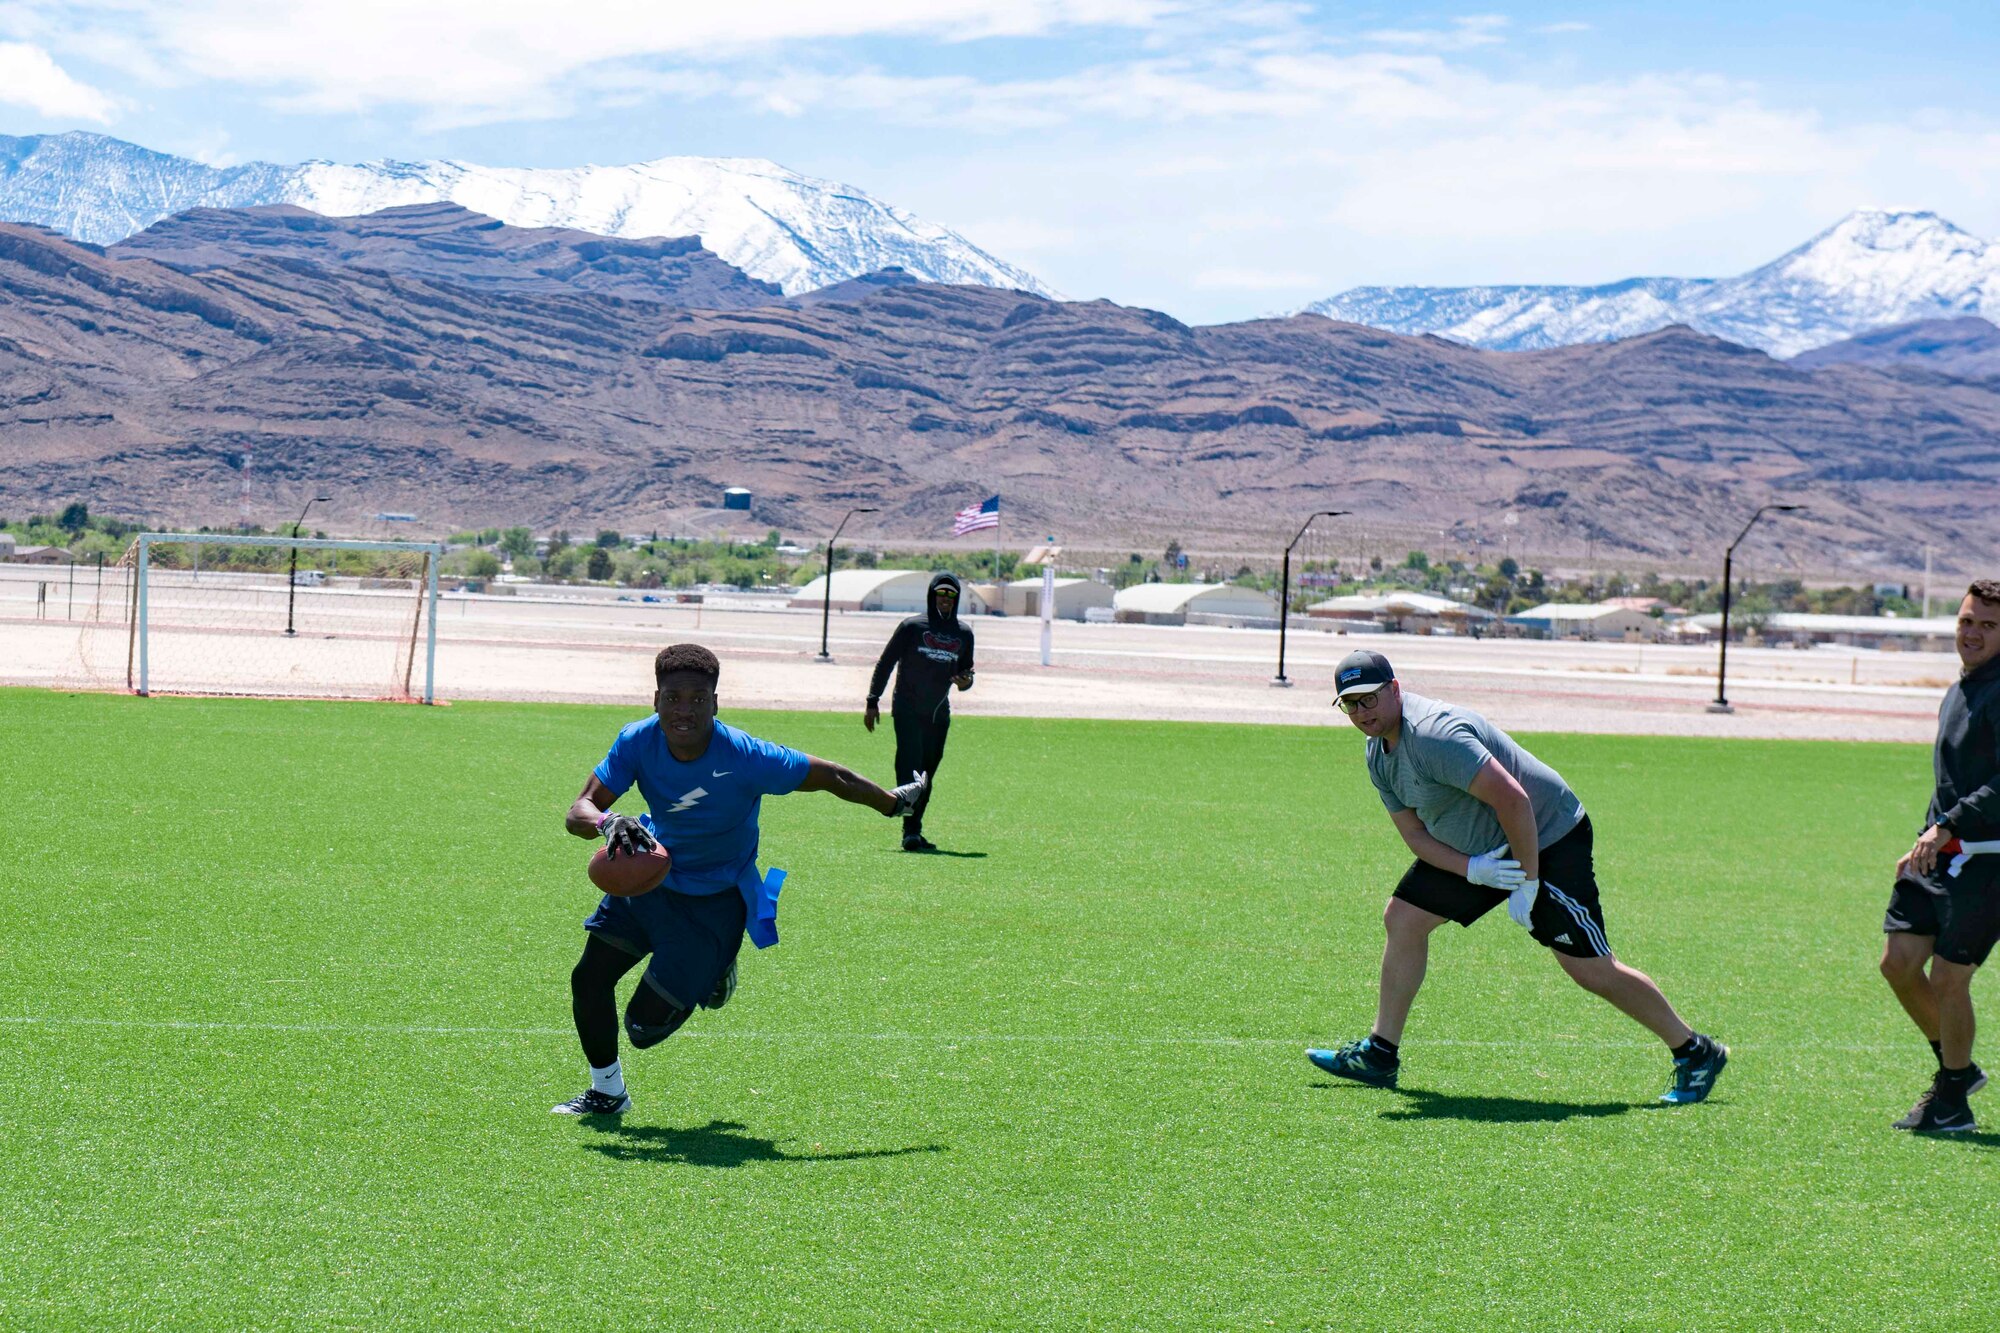 An airman sprints with a football on a turf field during a flag football game.